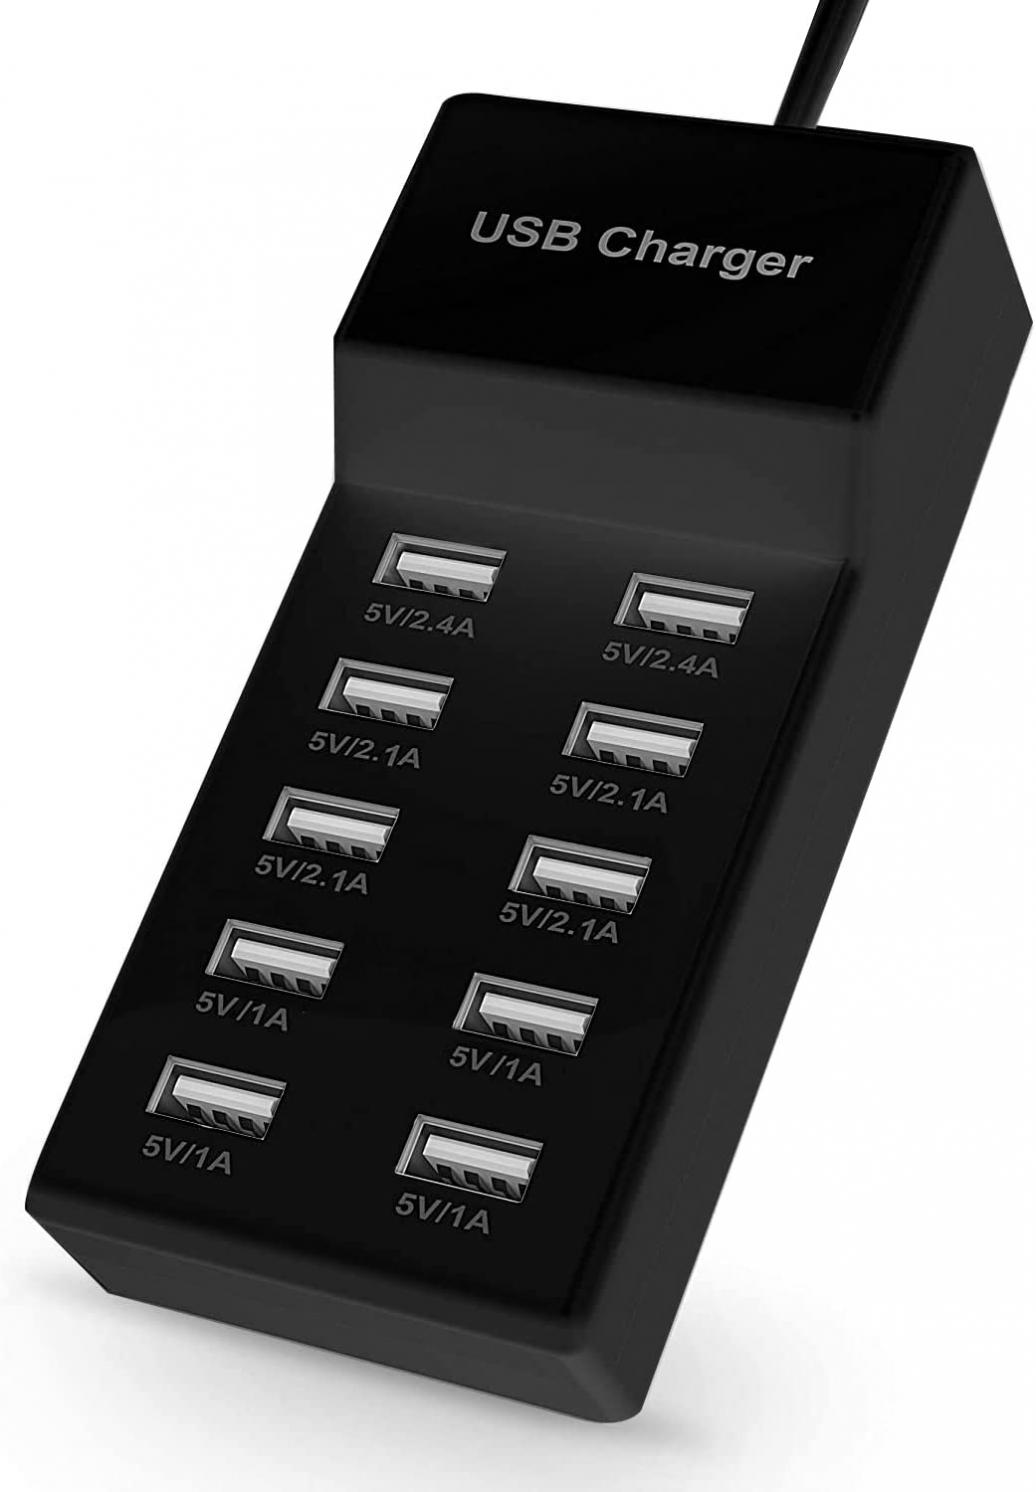 USB Charging Station10-Port USB Charger,Multiport USB Charger Station Hub, Compatible with iPhone, Galaxy, iPad Tablet, and Other USB Charging Devices1